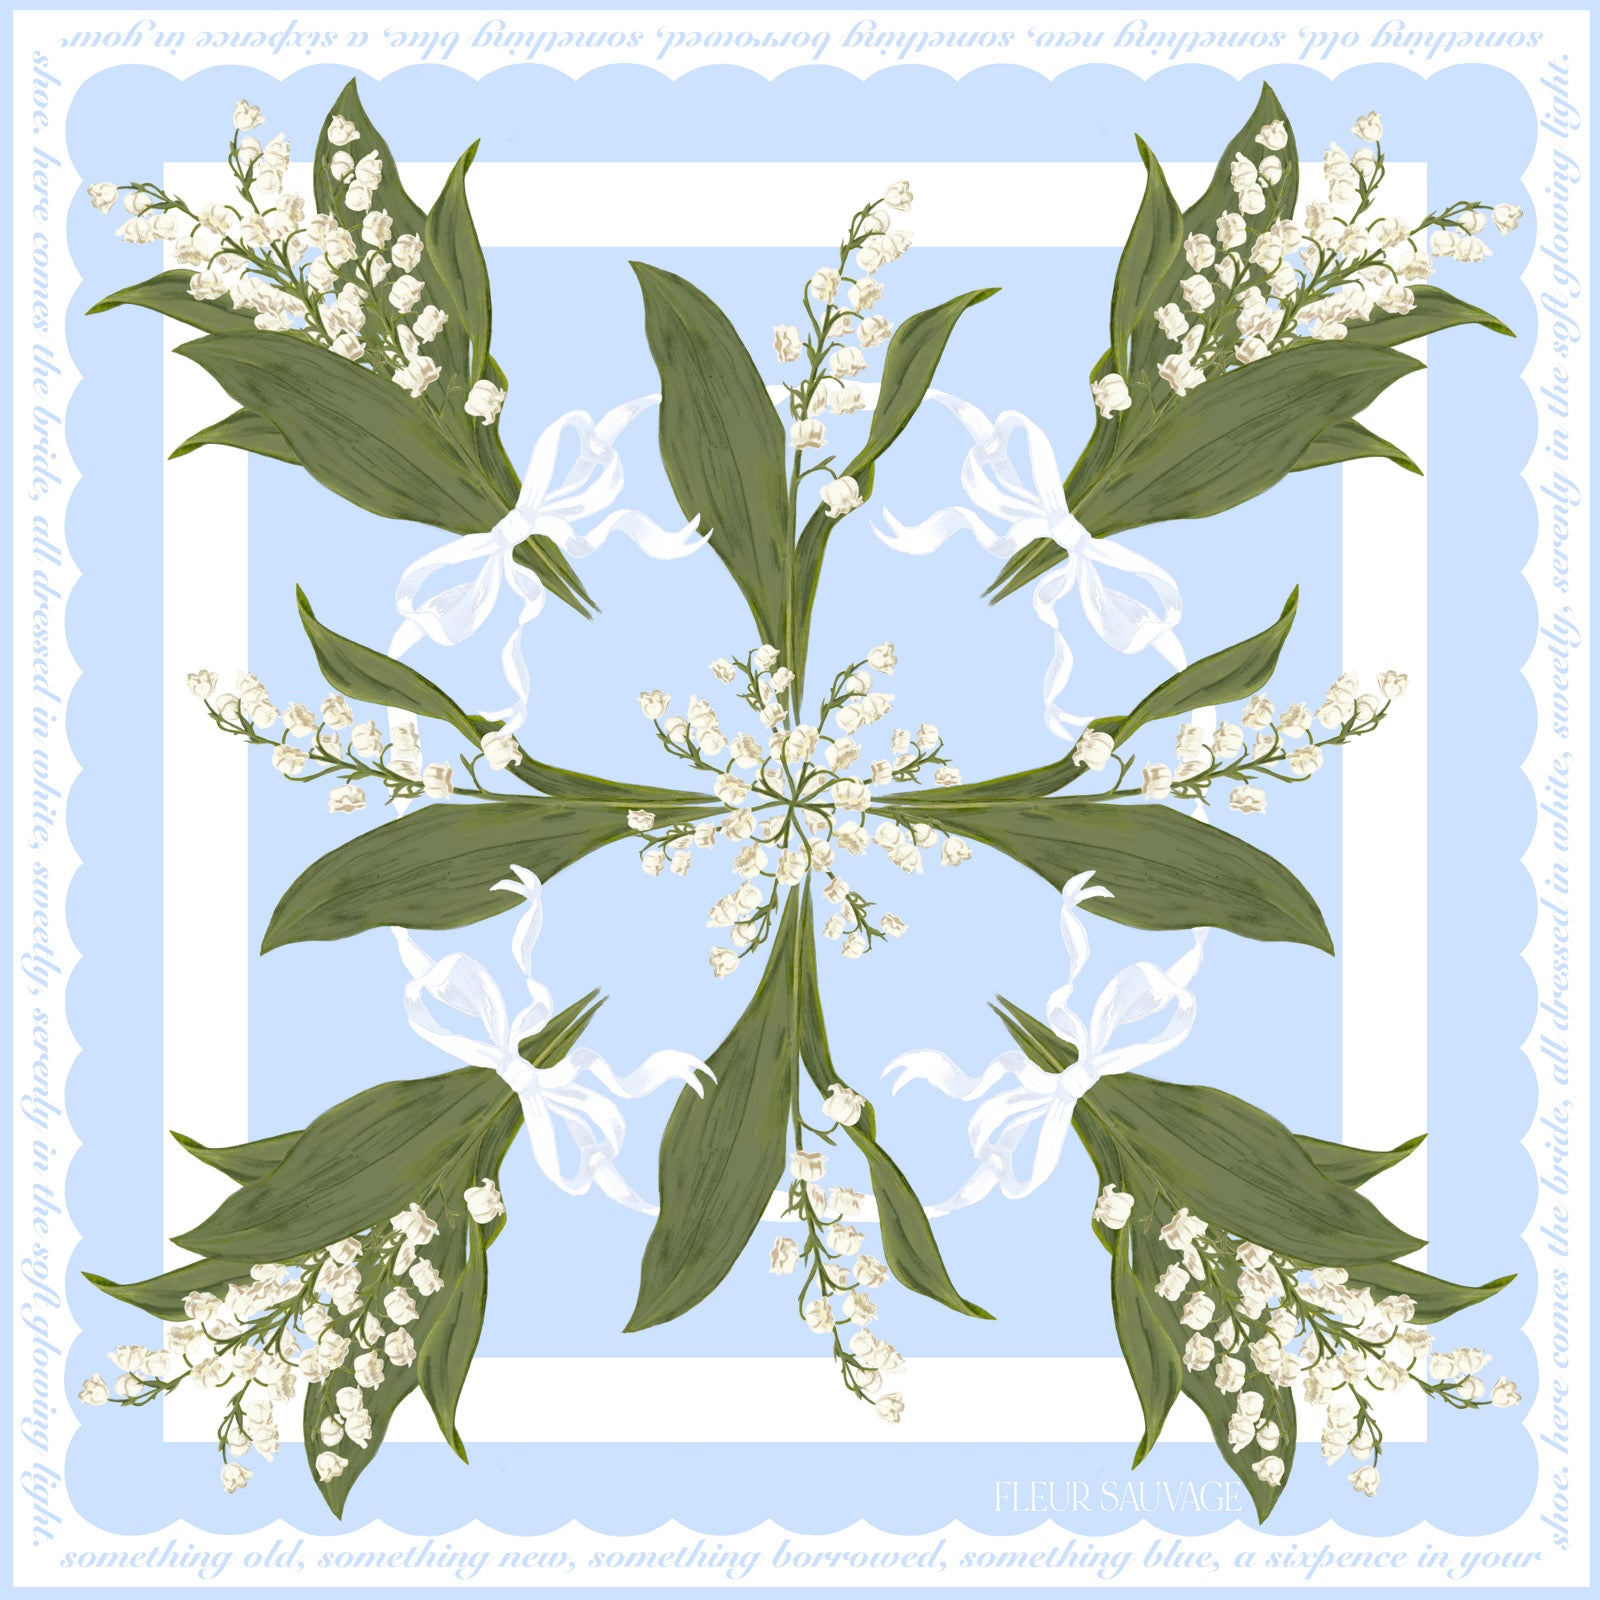 Bridal Lily of the Valley Scarf 90